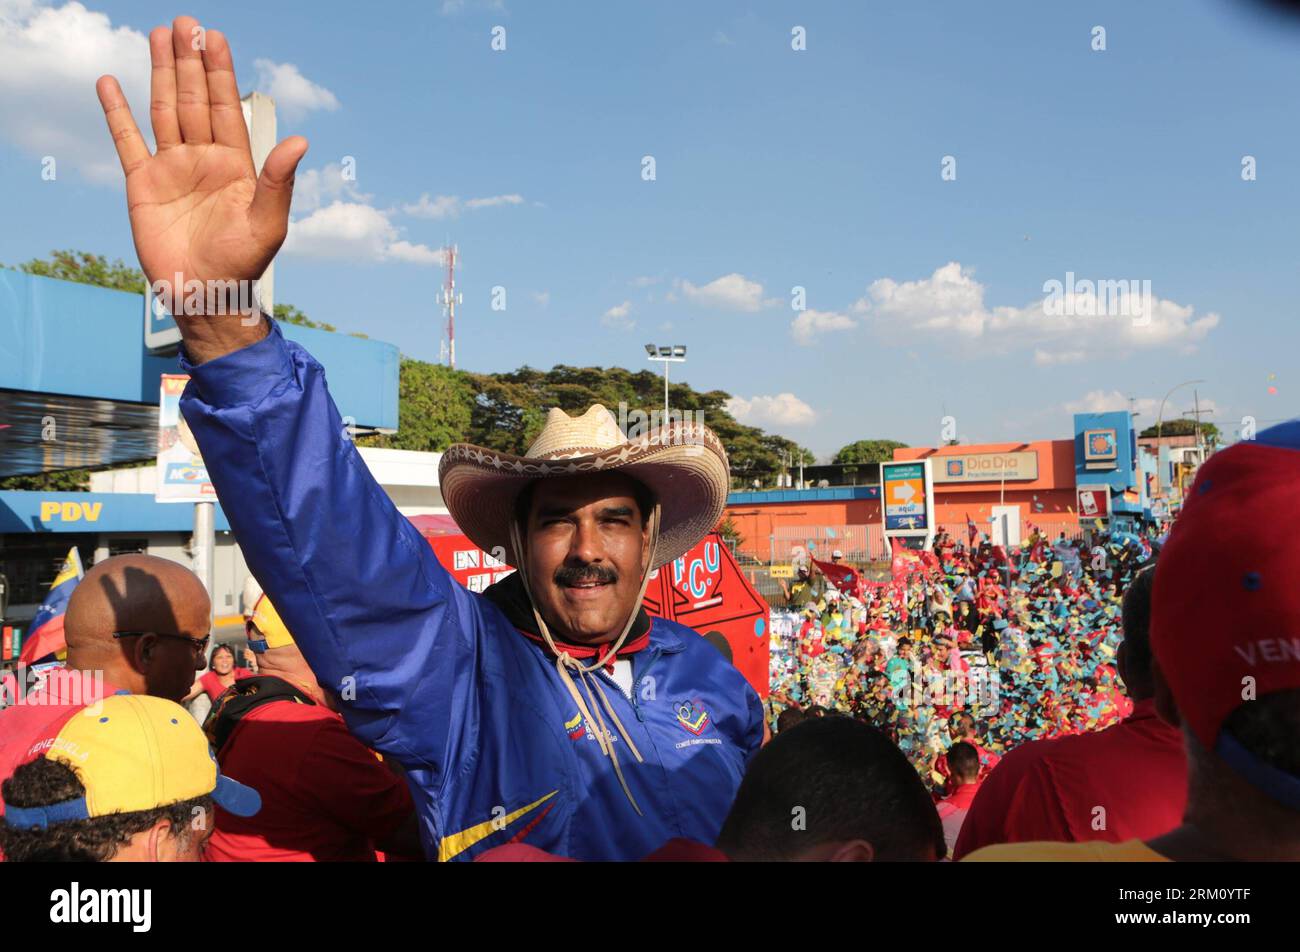 Bildnummer: 59482946  Datum: 07.04.2013  Copyright: imago/Xinhua Image provided by Hugo Chavez Campaign Comand shows Venezuelan acting President and presidential candidate Nicolas Maduro attending his closing campaign, in San Juan de los Morros, state of Guaruco, Venezuela, on April 7, 2013. (Xinhua/Hugo Chavez Campaign Comand) (ah) (sp) VENEZUELA-GUARICO-ELECTION RALLY-MADURO PUBLICATIONxNOTxINxCHN Politik people Wahl Präsidentschaftswahl Wahlkampf xas x0x 2013 quer premiumd     59482946 Date 07 04 2013 Copyright Imago XINHUA Image provided by Hugo Chavez Campaign Comand Shows Venezuelan Acti Stock Photo